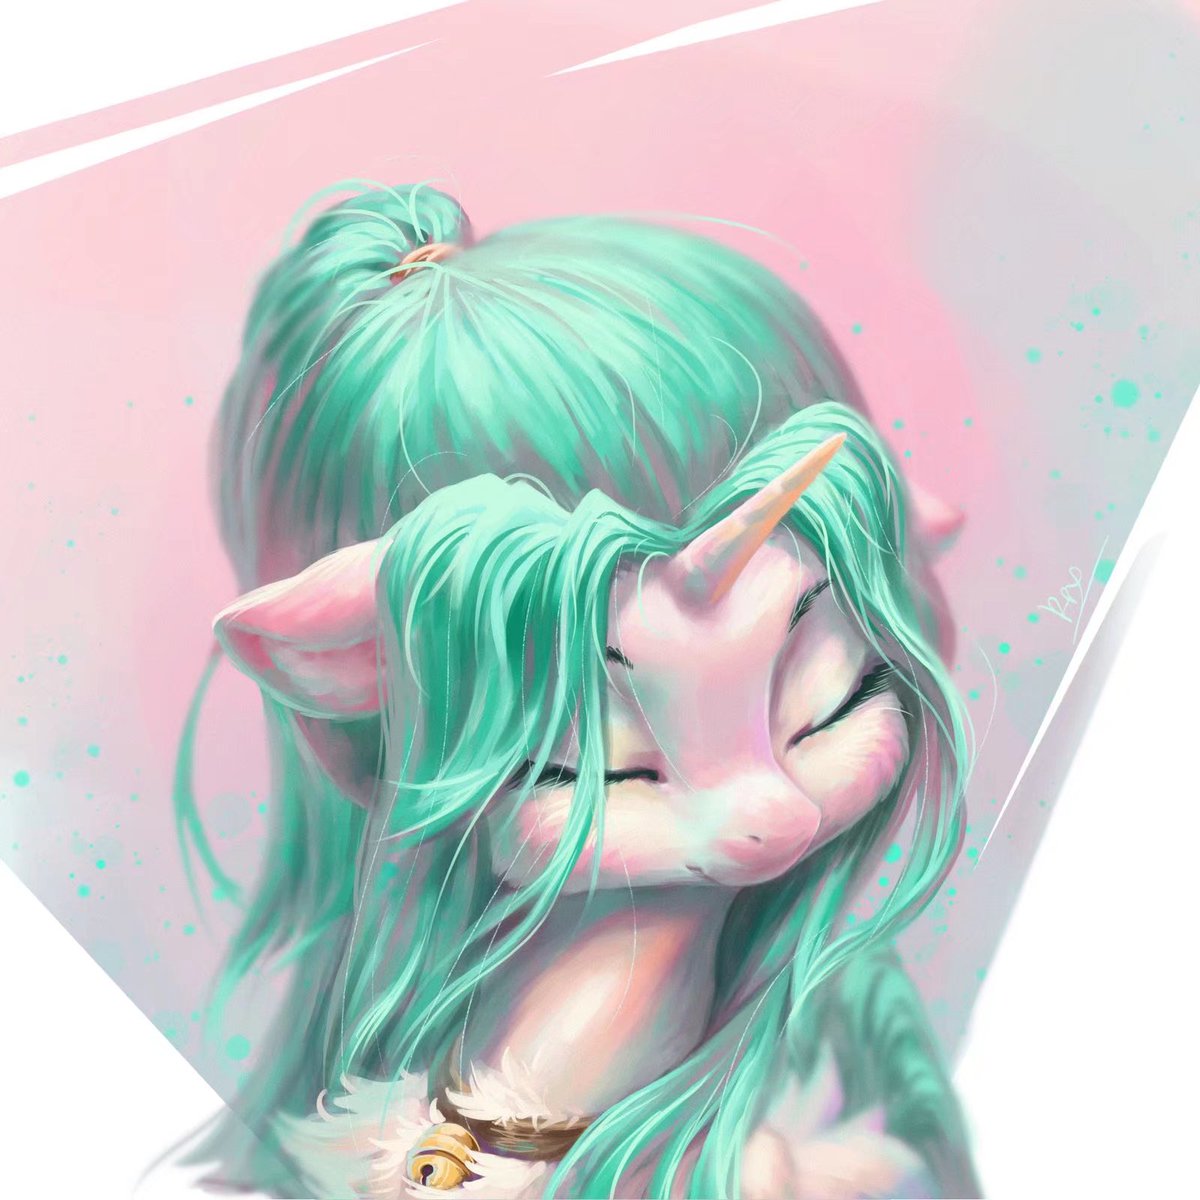 An old work~
@Tangxi_0 
#MLP #mylittlepony